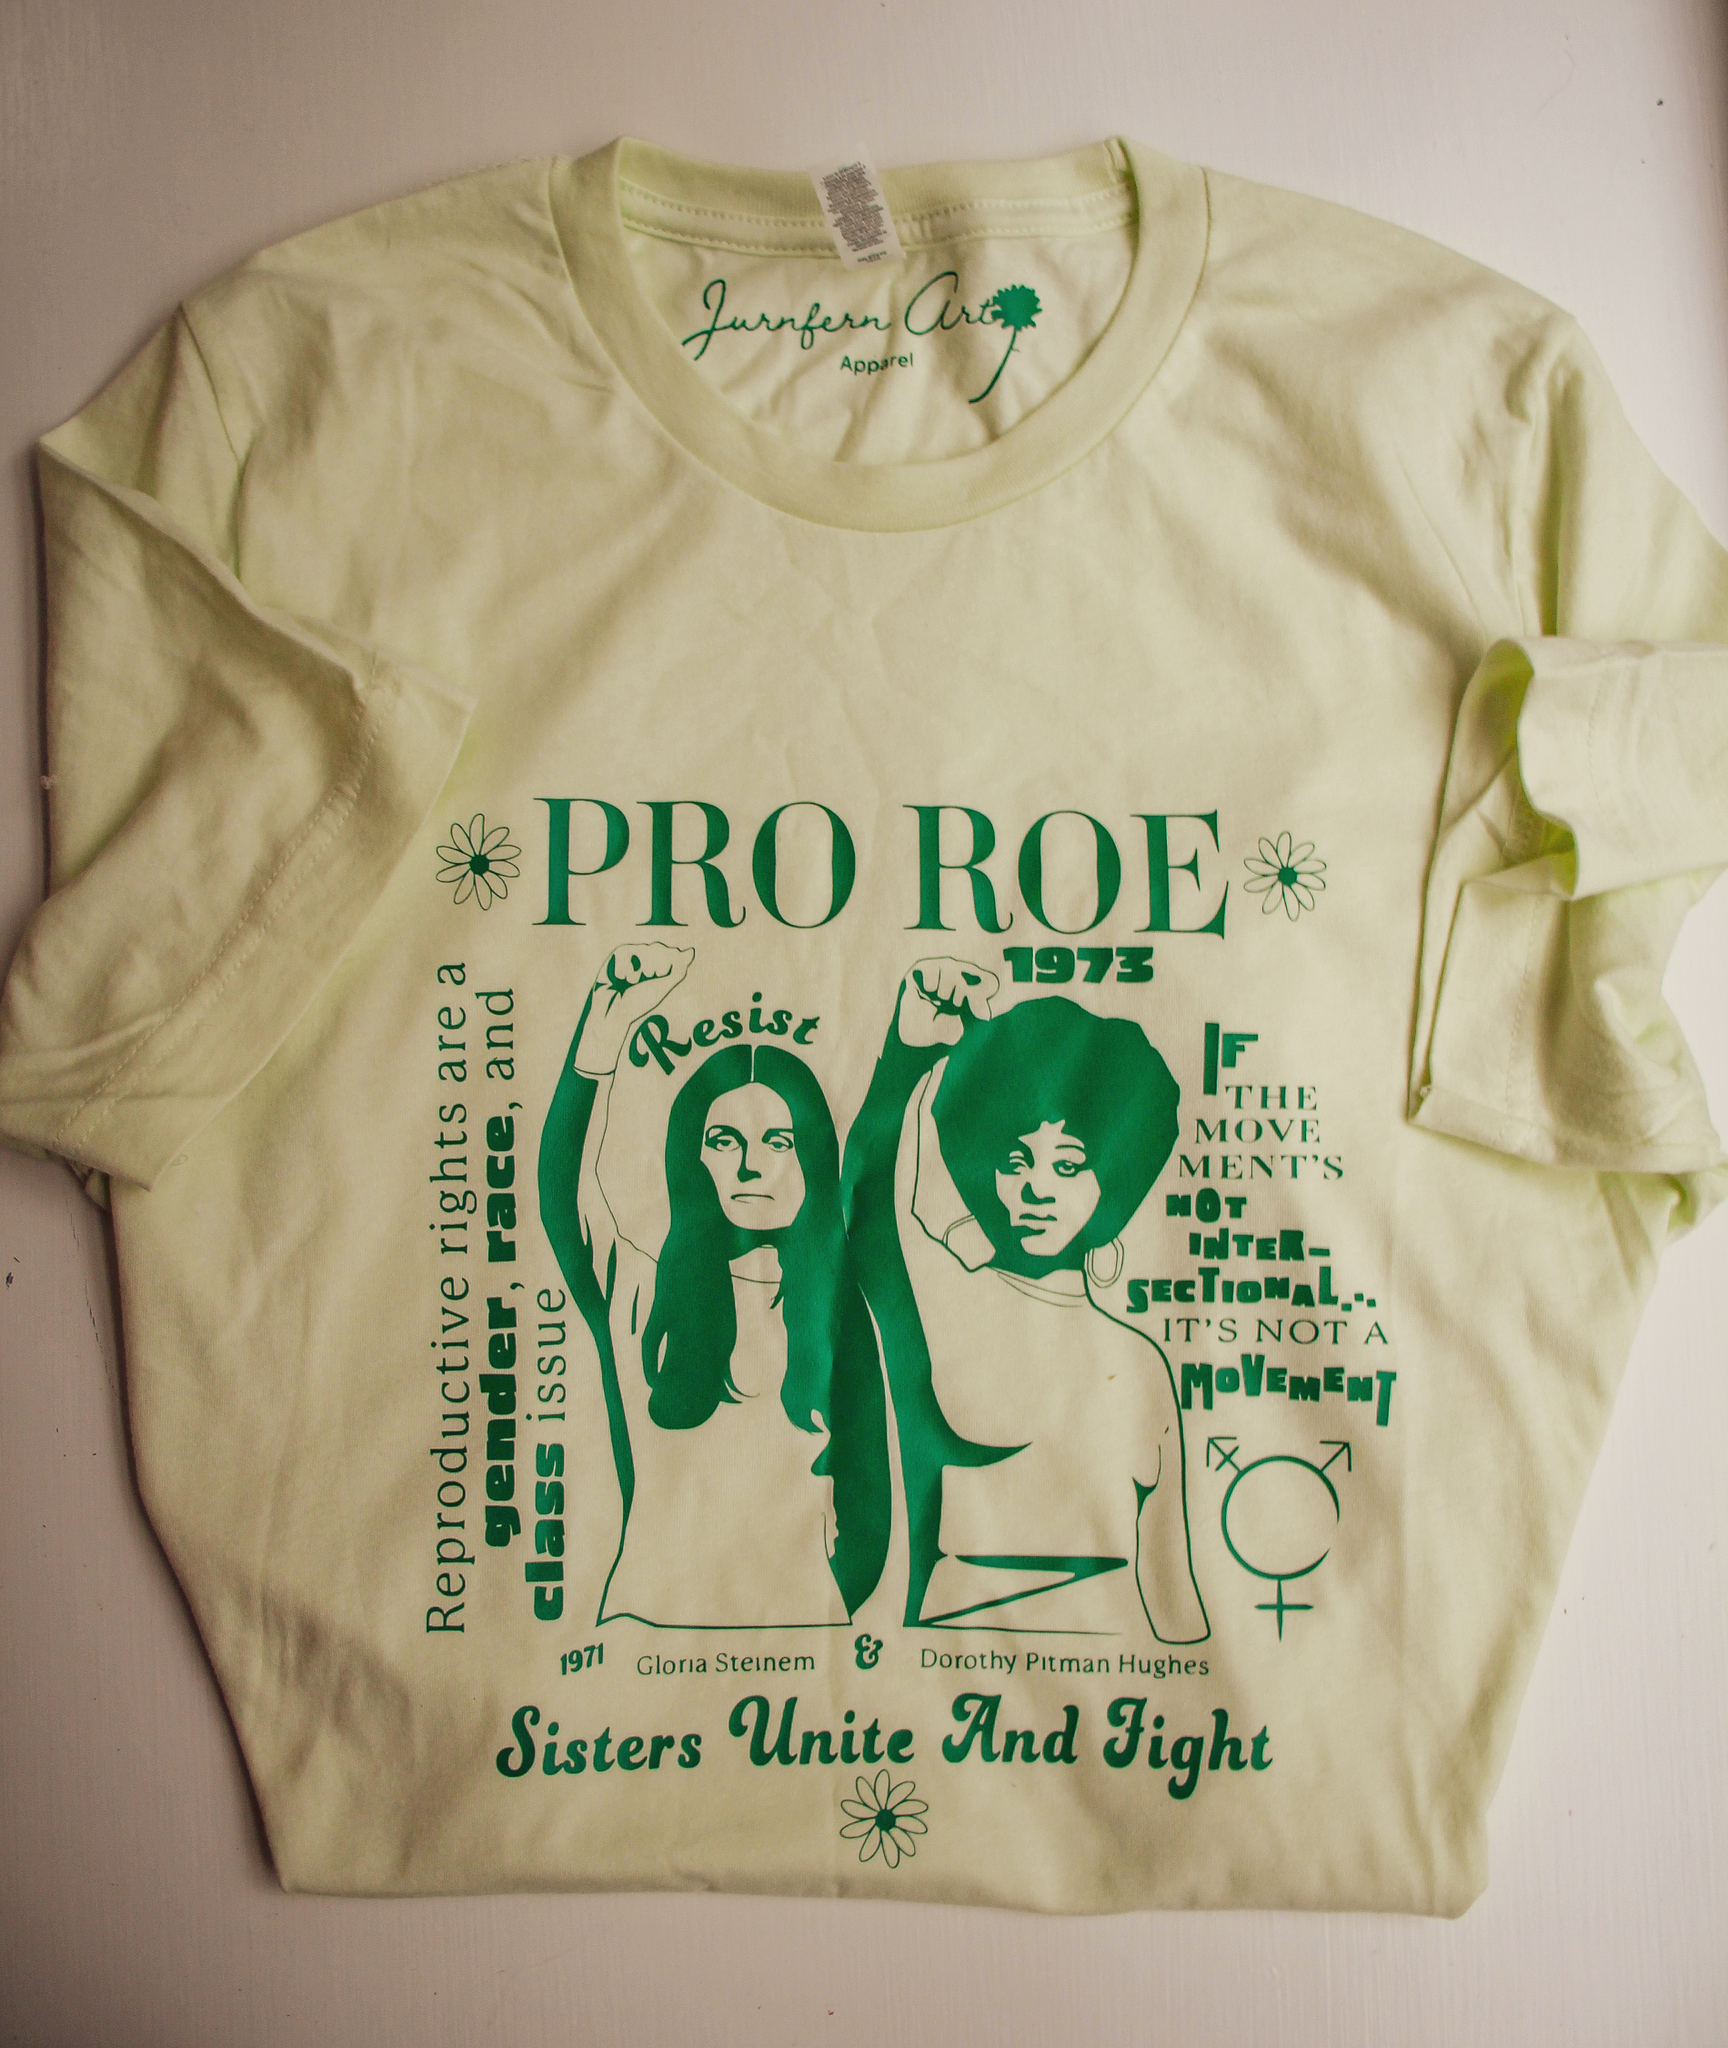 A t-shirt with a green printed image on it of Gloria Steinem and Dorothy Pitman, with text that reads 'PRO ROE' and 'Sisters Unite and Fight'